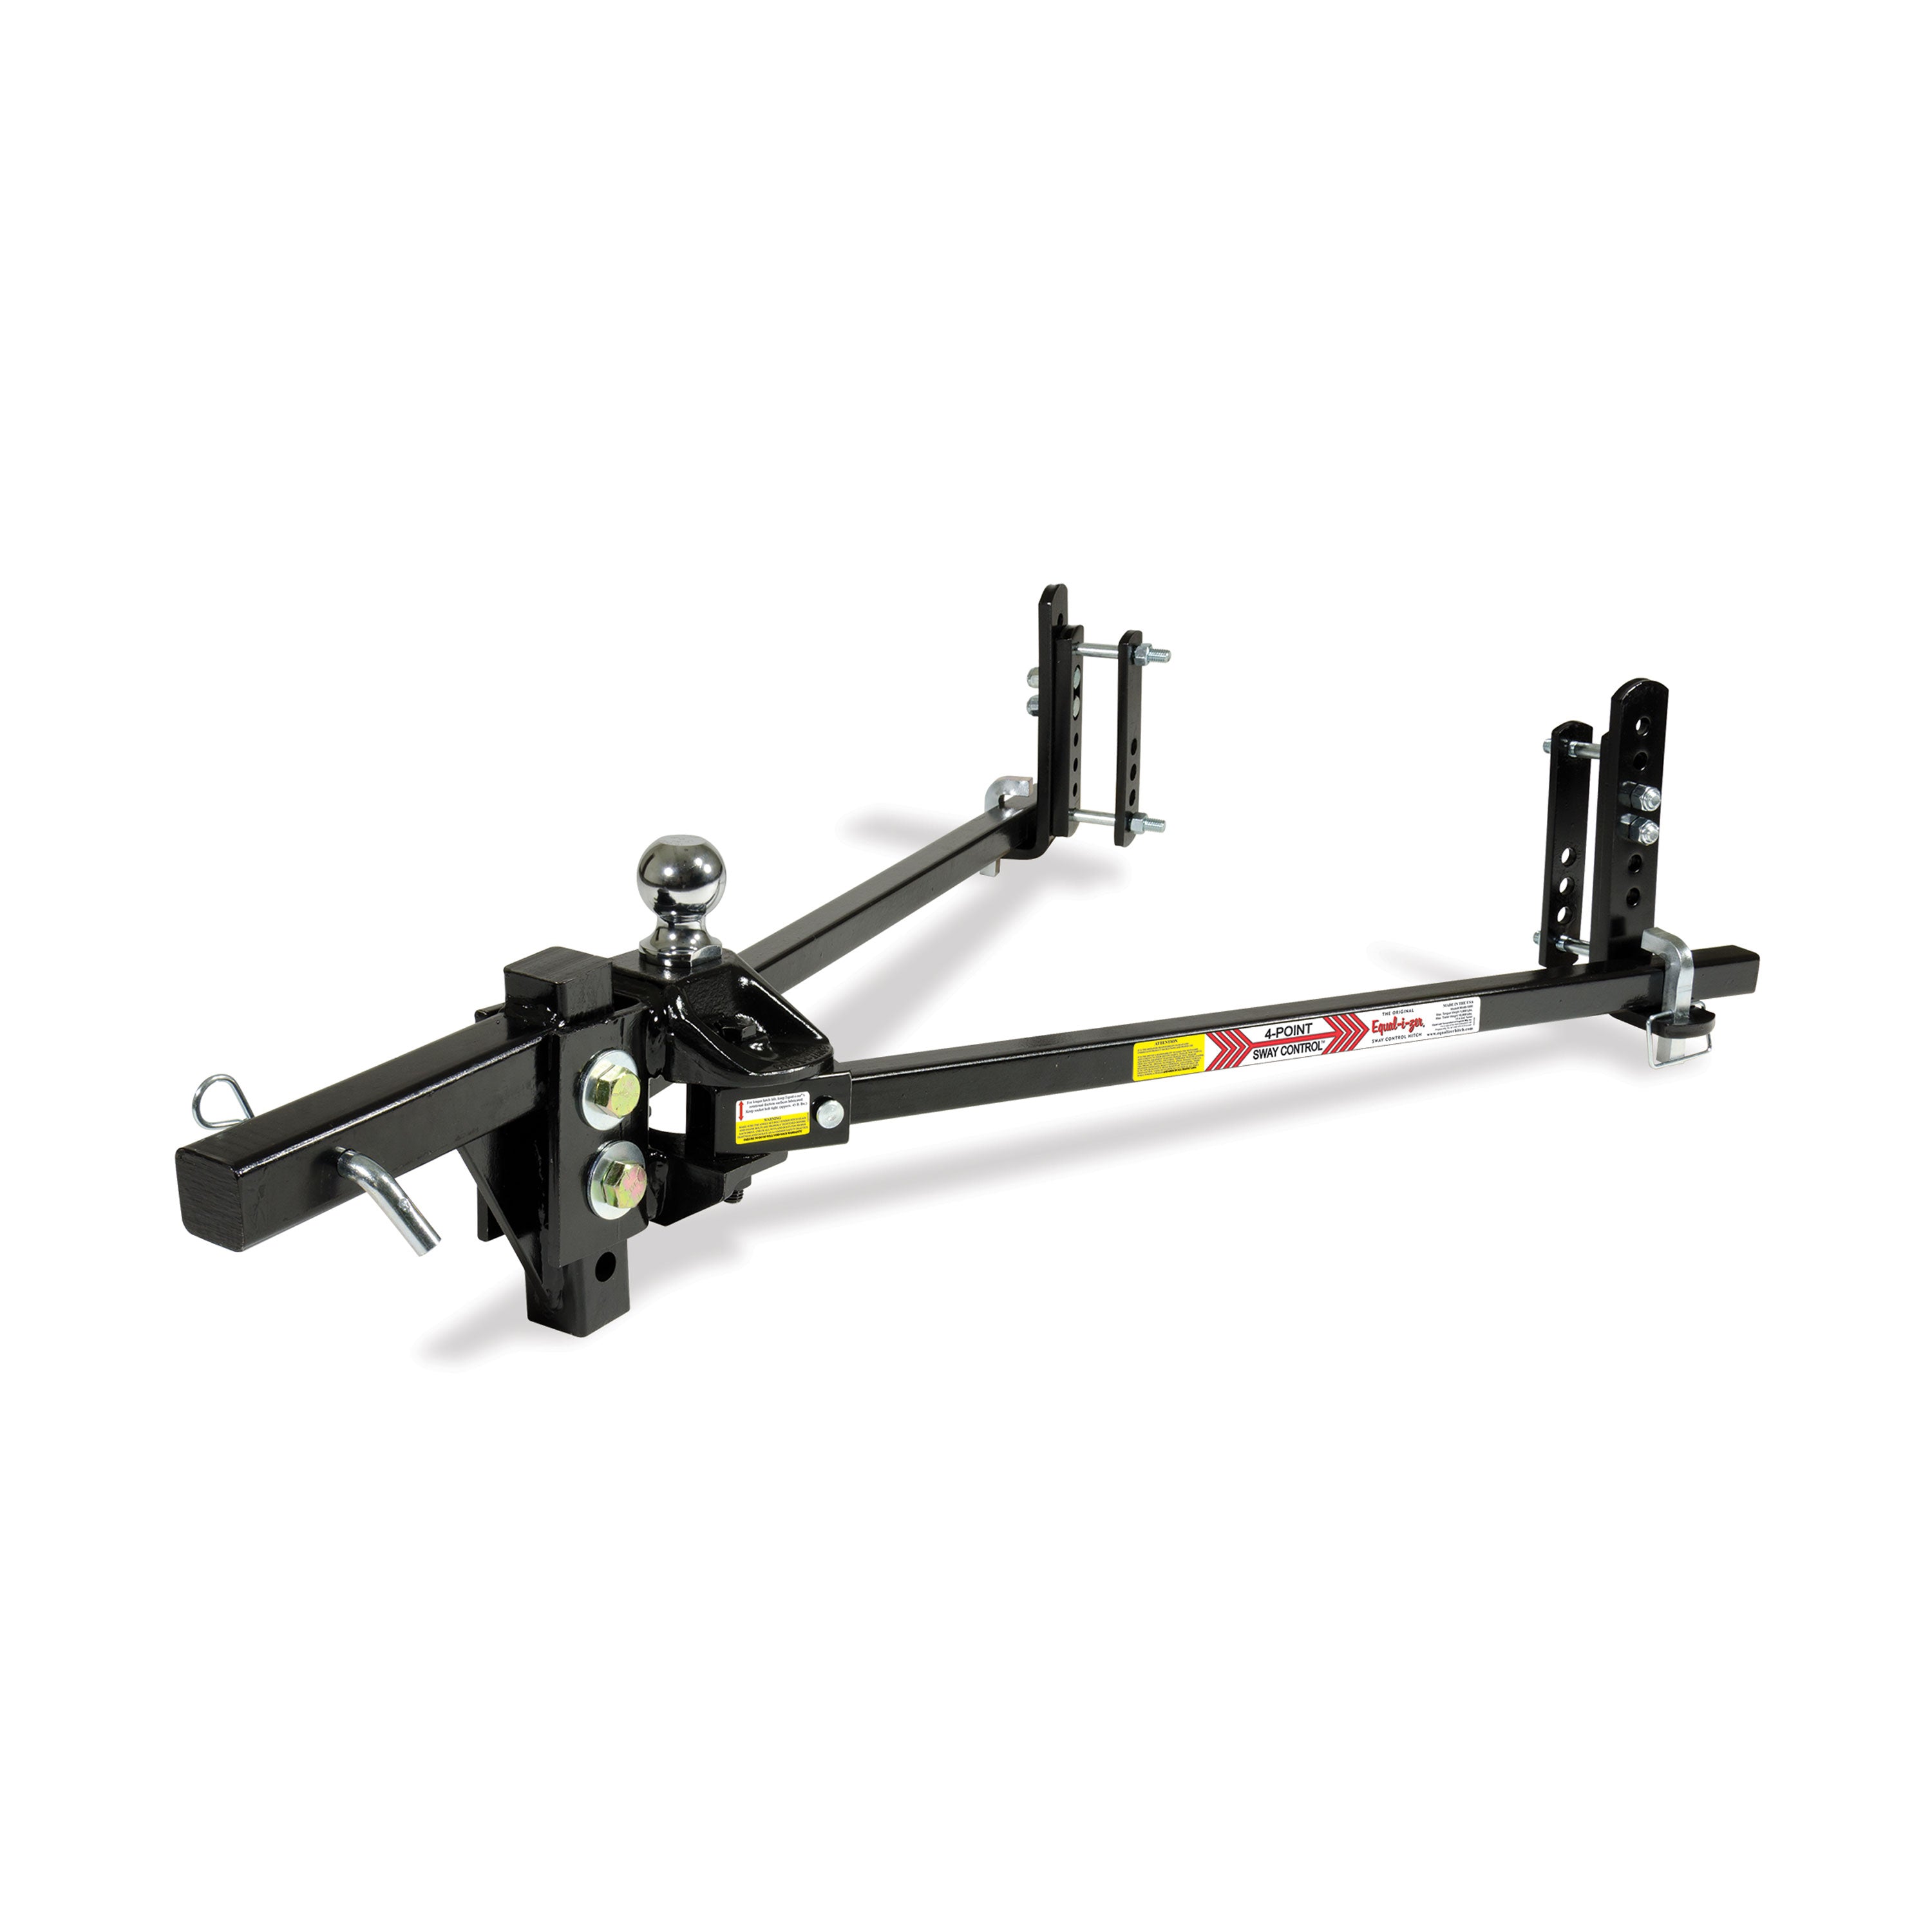 Equal-i-zer 90-00-1201 Sway Control Hitch (No Shank) - 1,200 lbs. TW/12,000 lbs. GTW